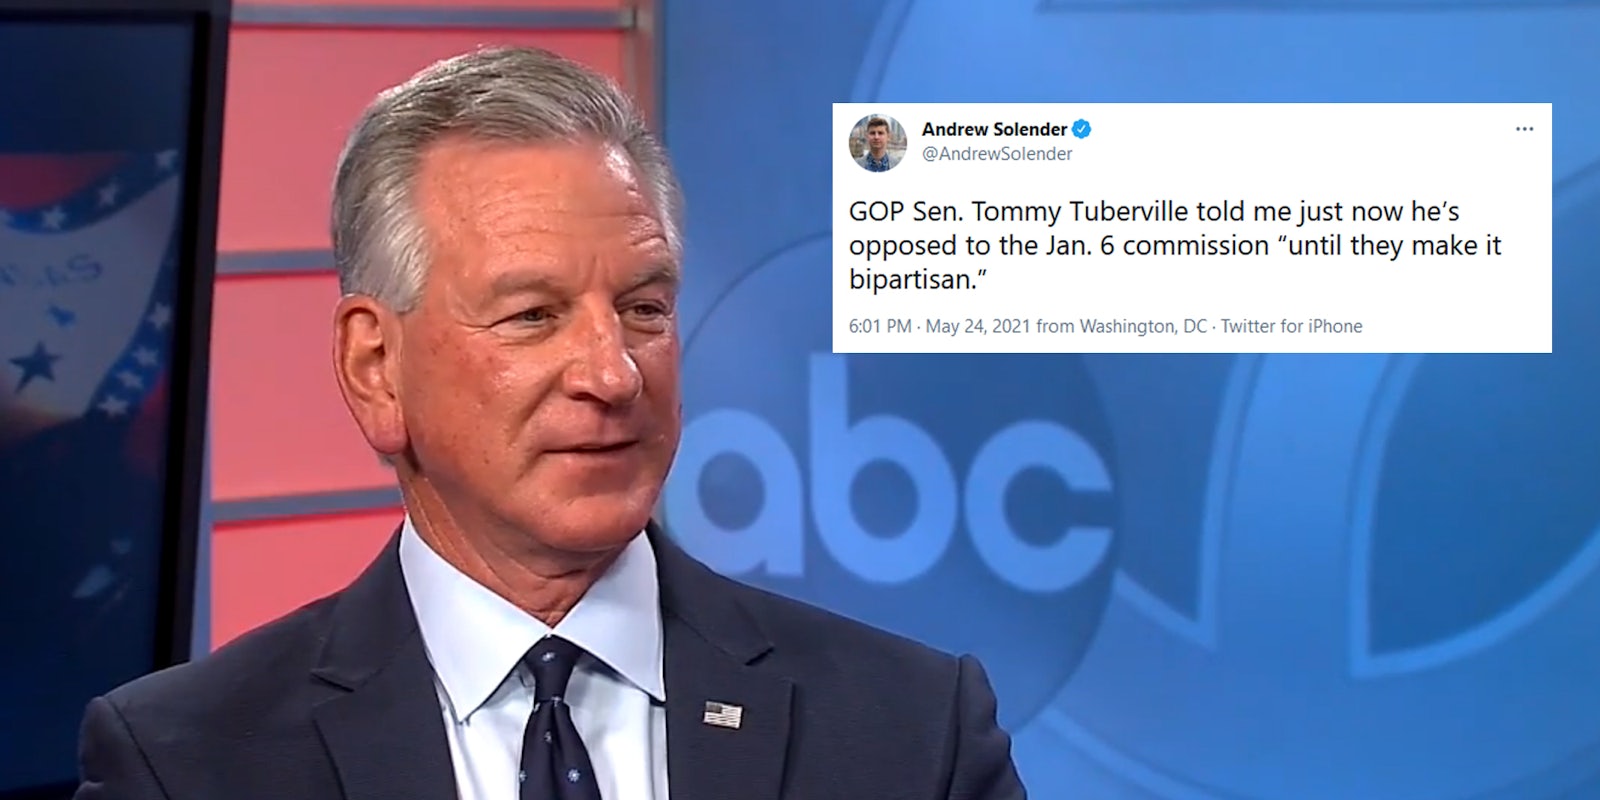 Sen. Tommy Tuberville doing a TV interview. Next to him is a tweet from a reporter quoting him as saying that he won't vote for a Capitol riot commission unless it is bipartisan, which it is.